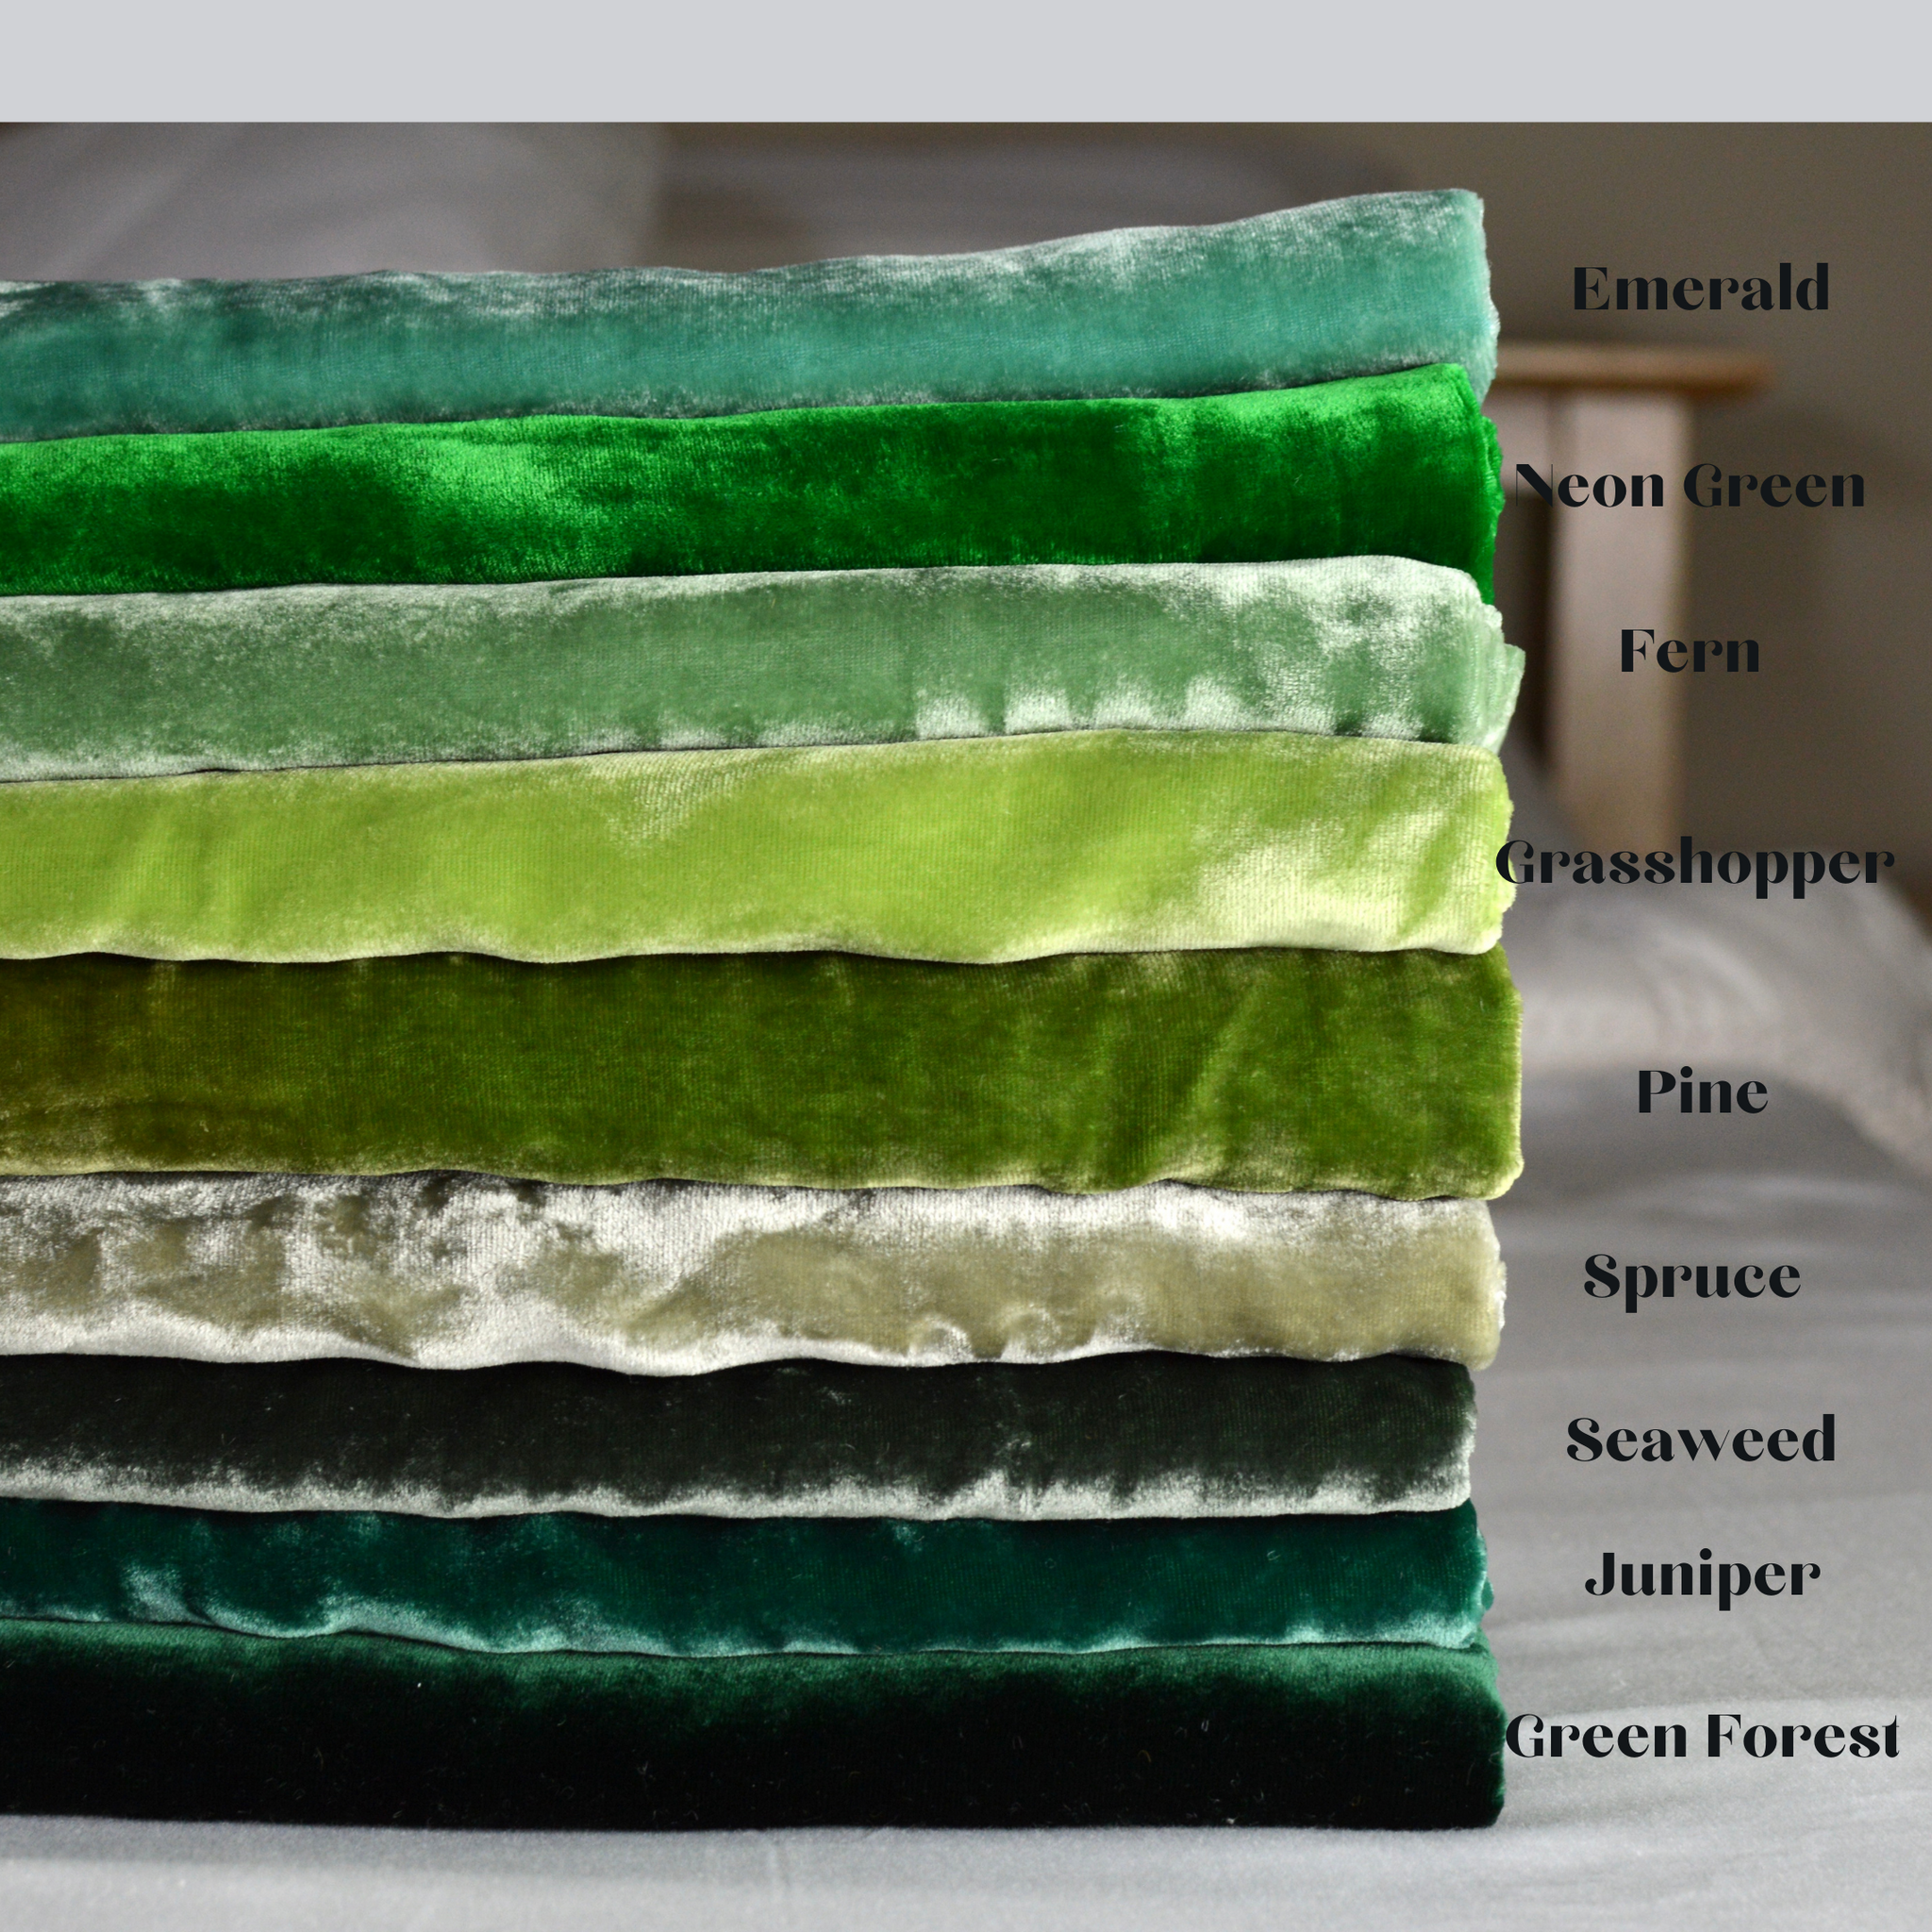 Silk Velvet Fabric Whole sale by the yard